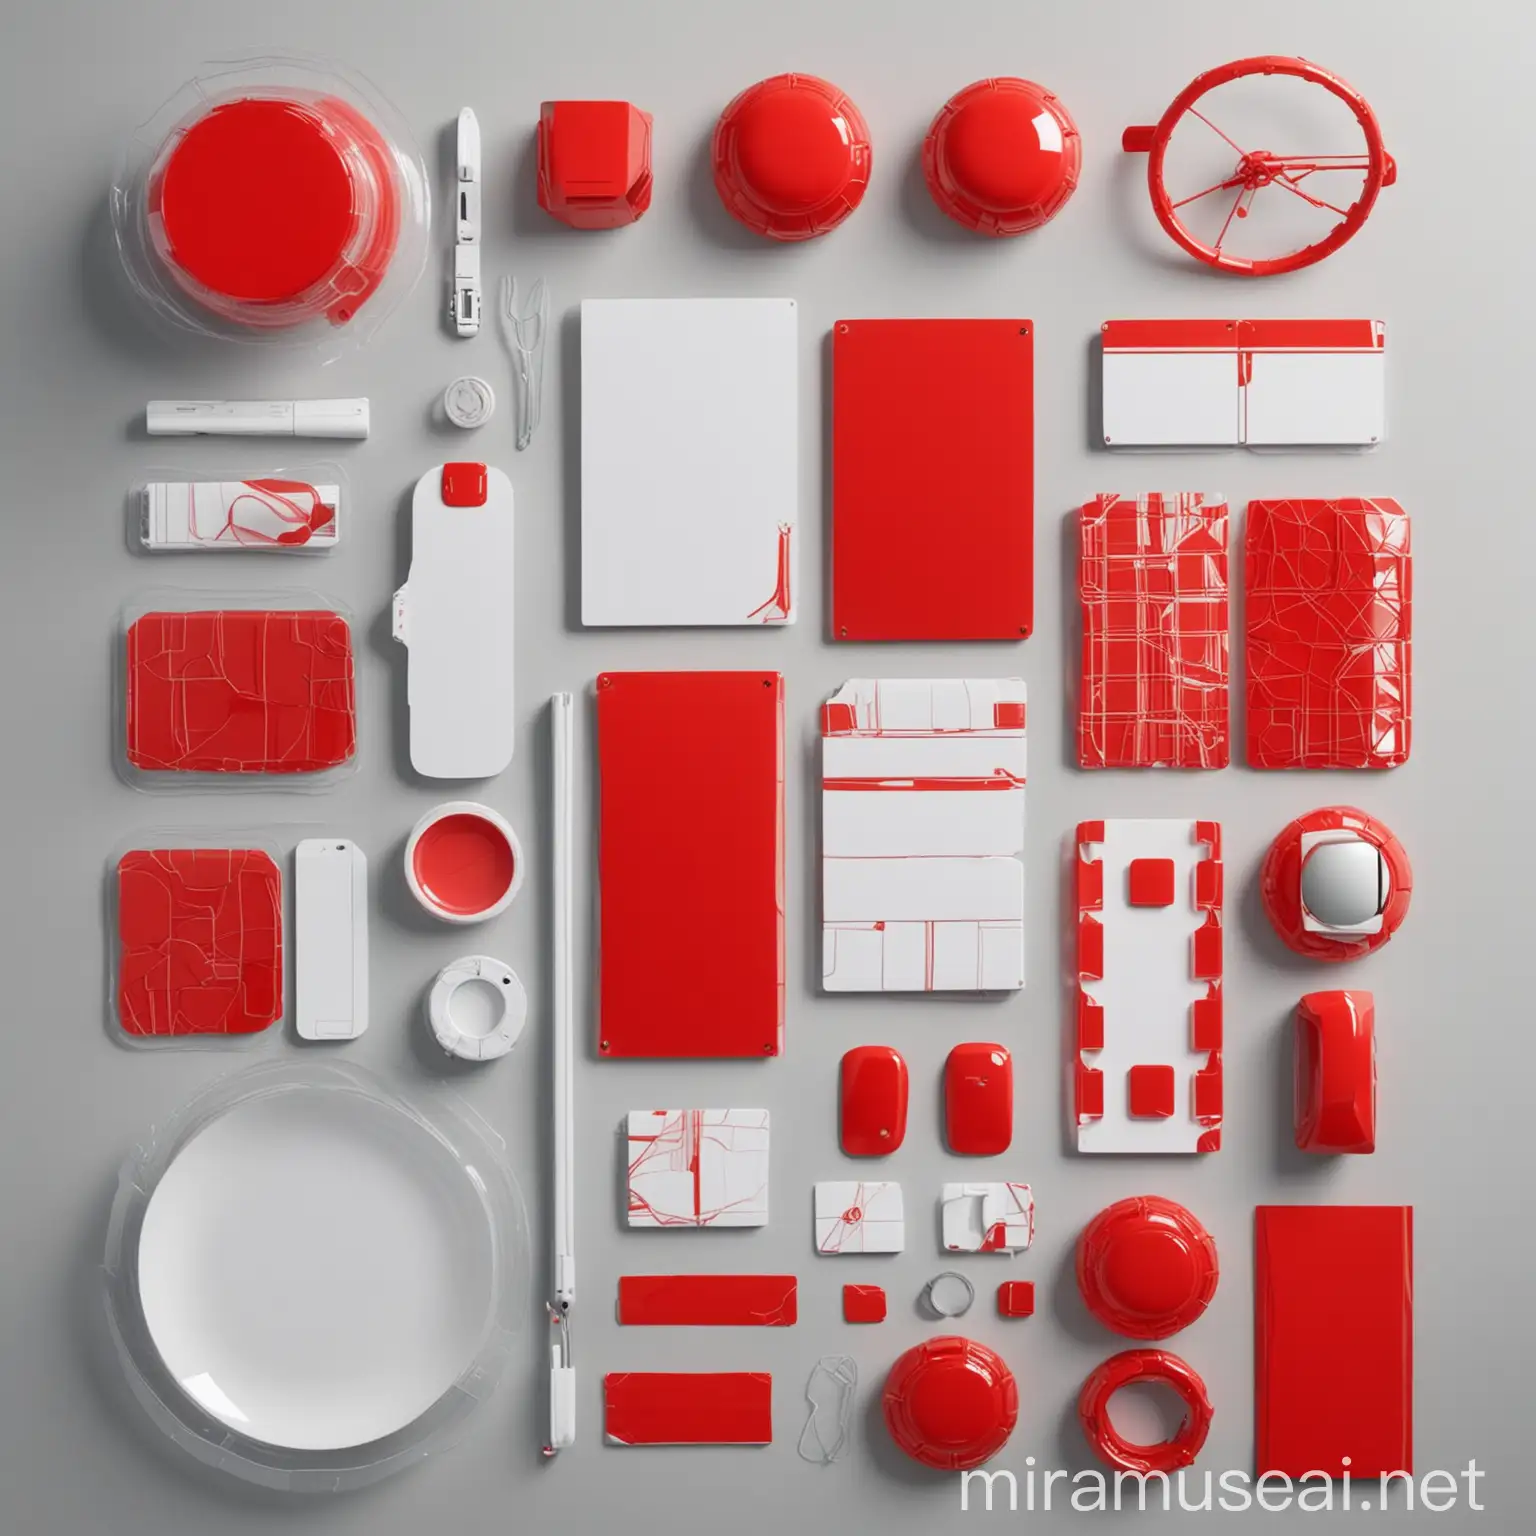 Create a moodboard that showcases bright red and white tones with reflective surfaces, plastic elements, and sleek curves. Infuse the design with technological motifs, security themes, and modern aesthetics, creating a fusion of innovation and minimalist sophistication.